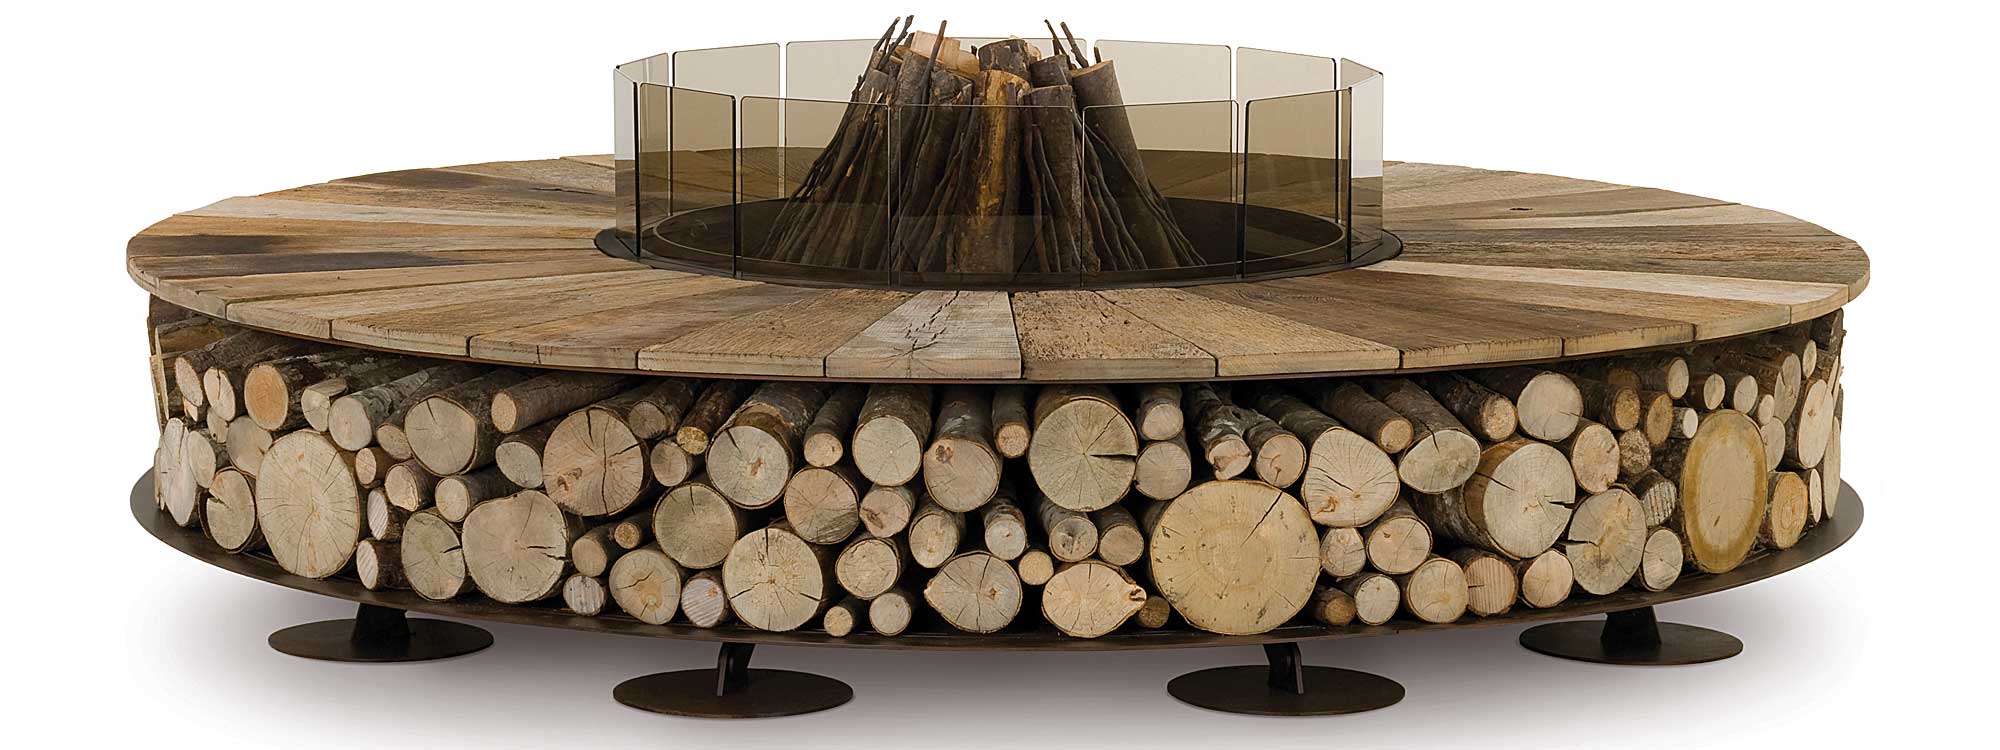 Studio image of Zero fire pit with chestnut surround and tempered glass fire screens by AK47 Design, Italy.